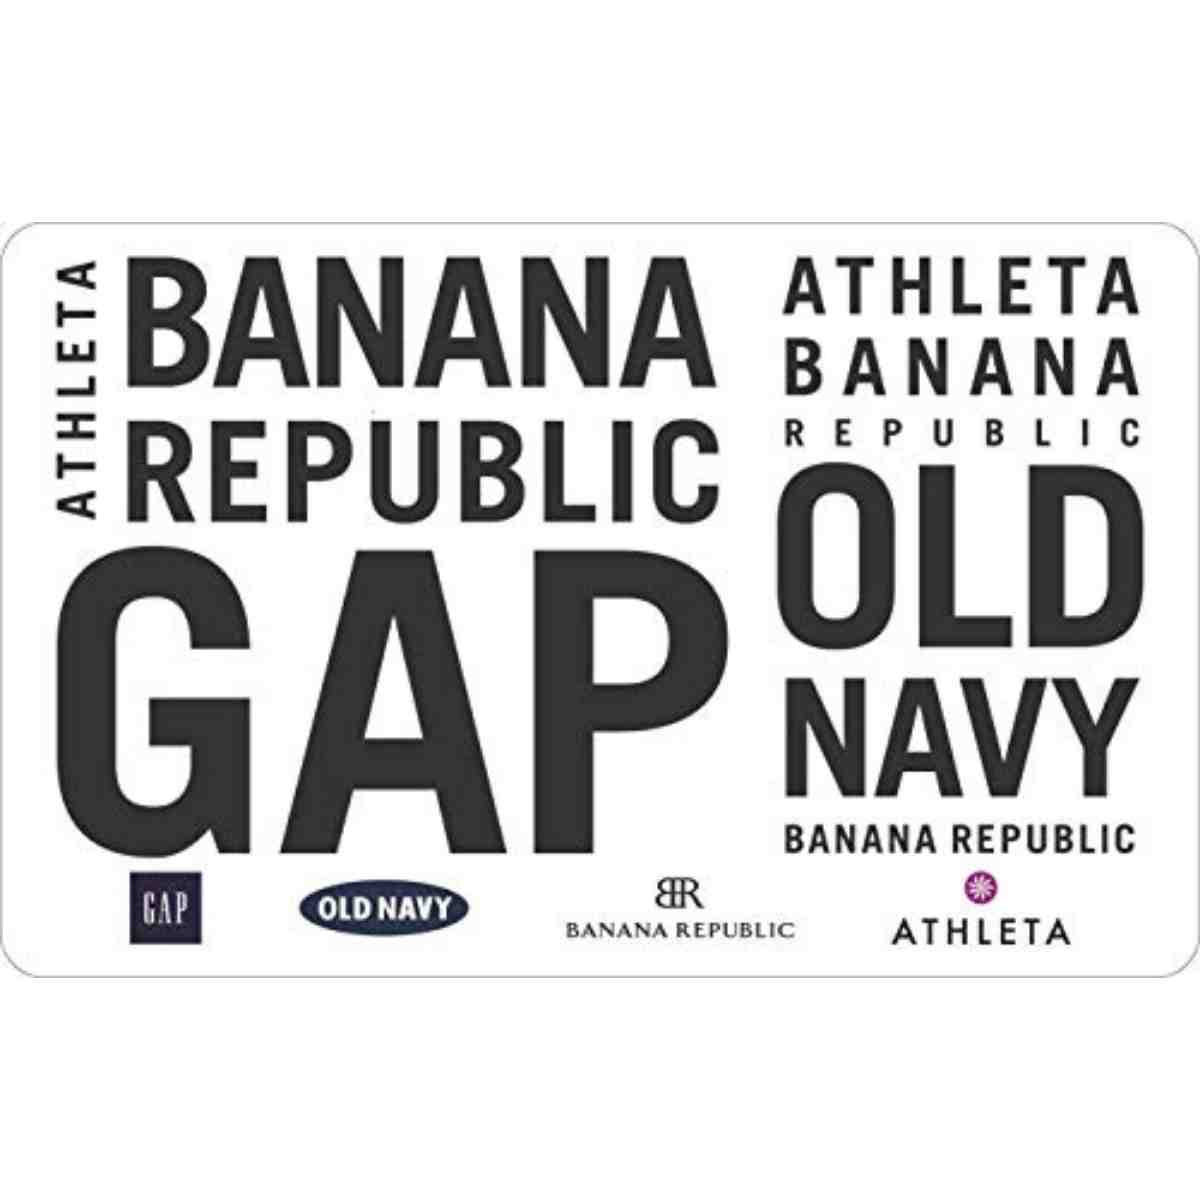 Can you use a gap gift card at old navy